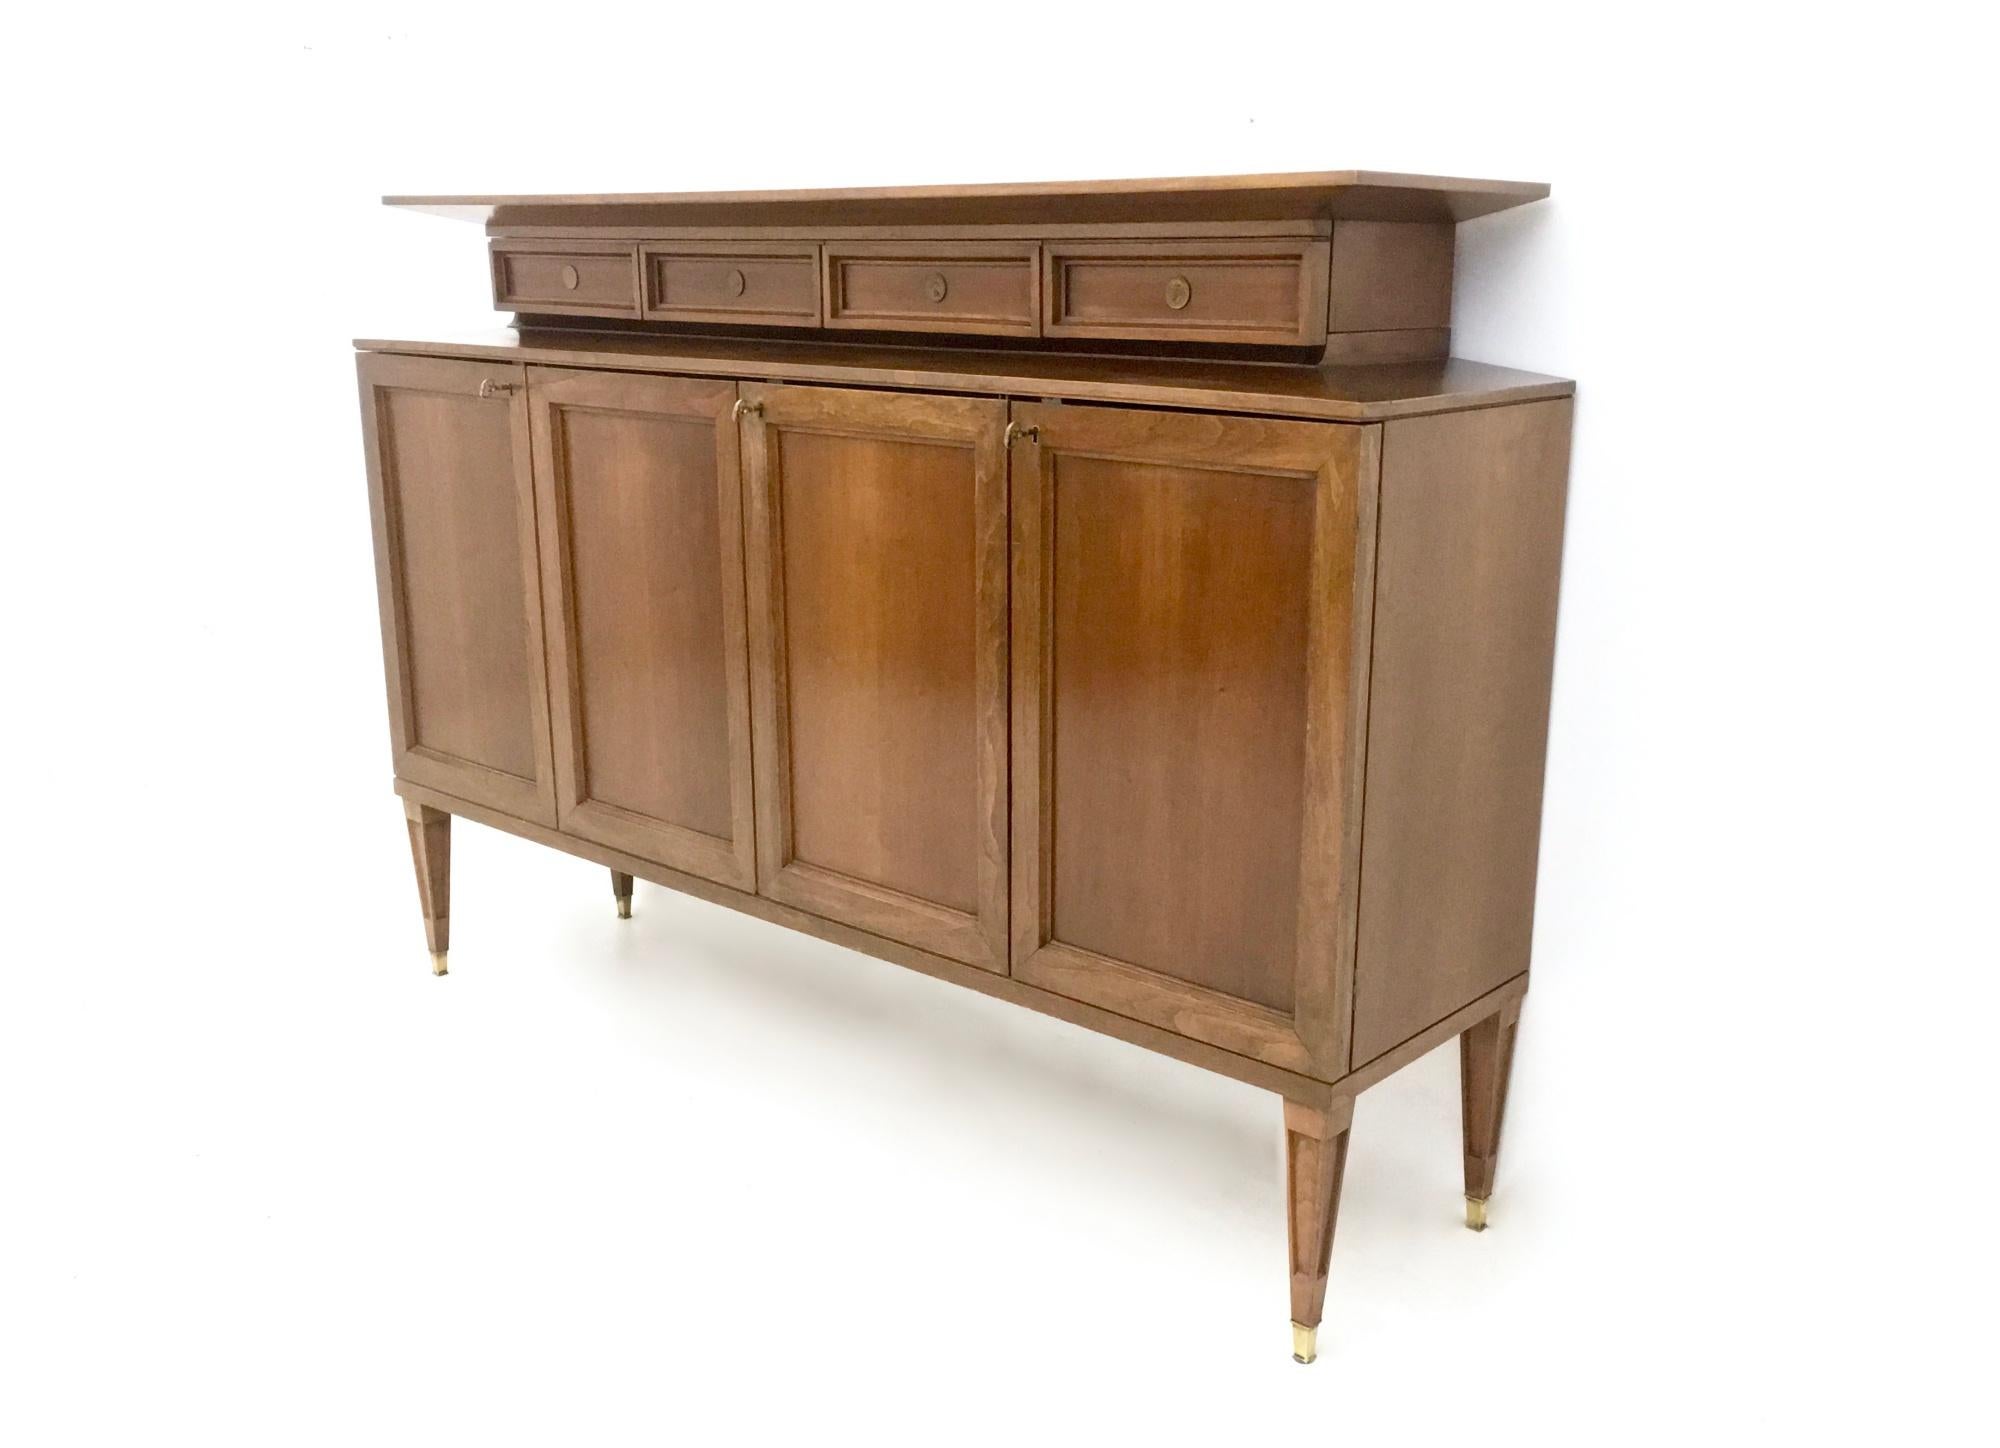 Made in Italy, 1950s. 
This cabinet is made in walnut and features brass details, walnut interiors and glass shelves. 
It is a vintage piece, therefore it might show slight traces of use, but it can be considered as in excellent original condition